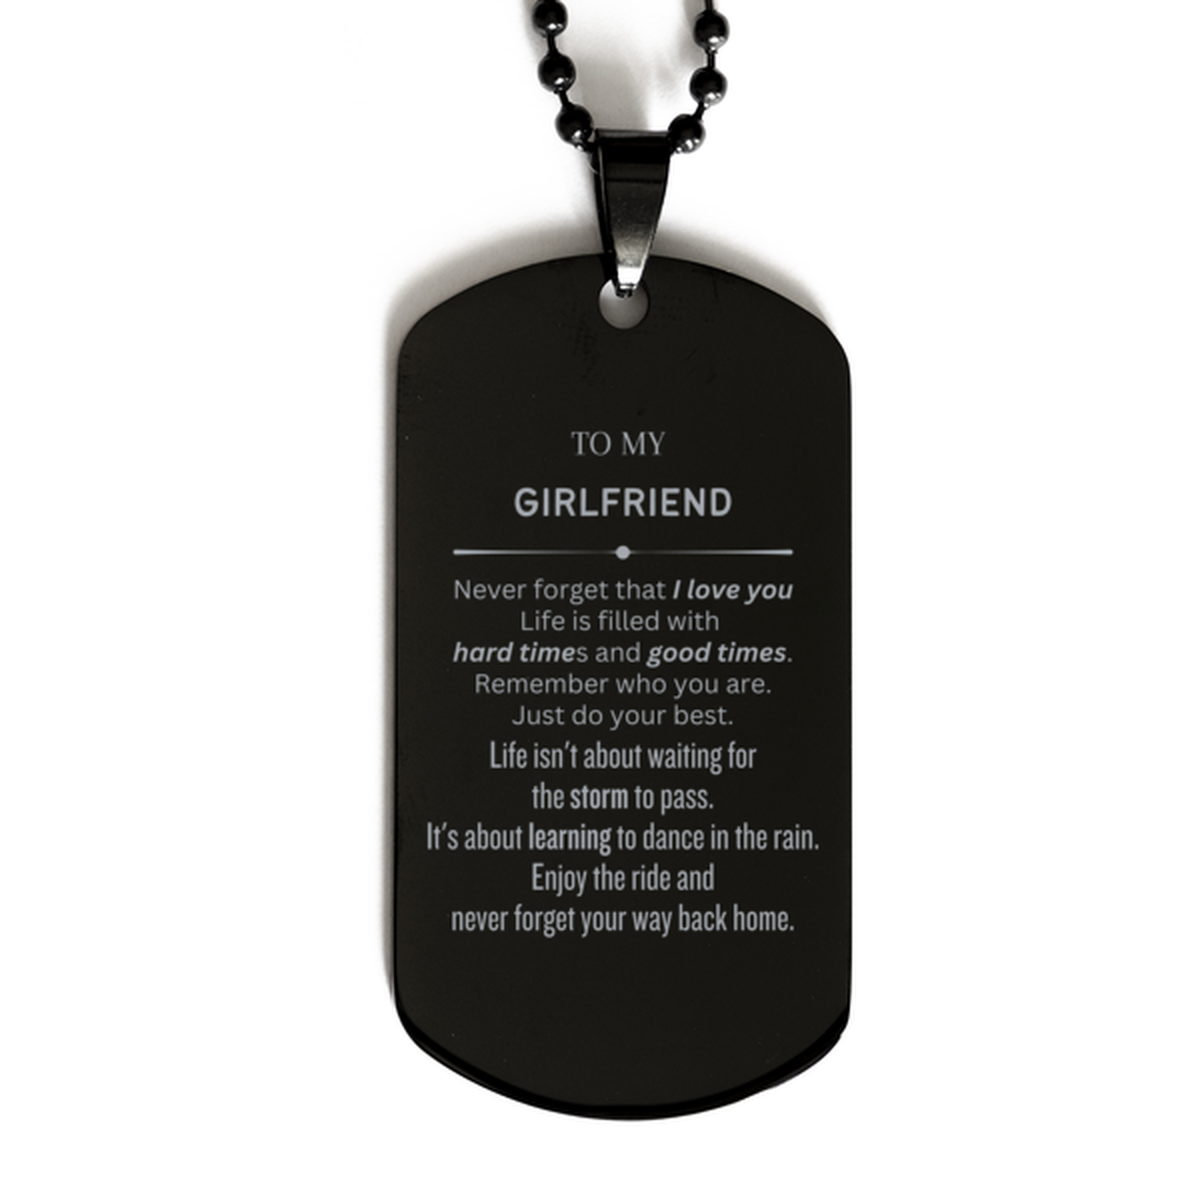 Christmas Girlfriend Black Dog Tag Gifts, To My Girlfriend Birthday Thank You Gifts For Girlfriend, Graduation Unique Gifts For Girlfriend To My Girlfriend Never forget that I love you life is filled with hard times and good times. Remember who you are. J